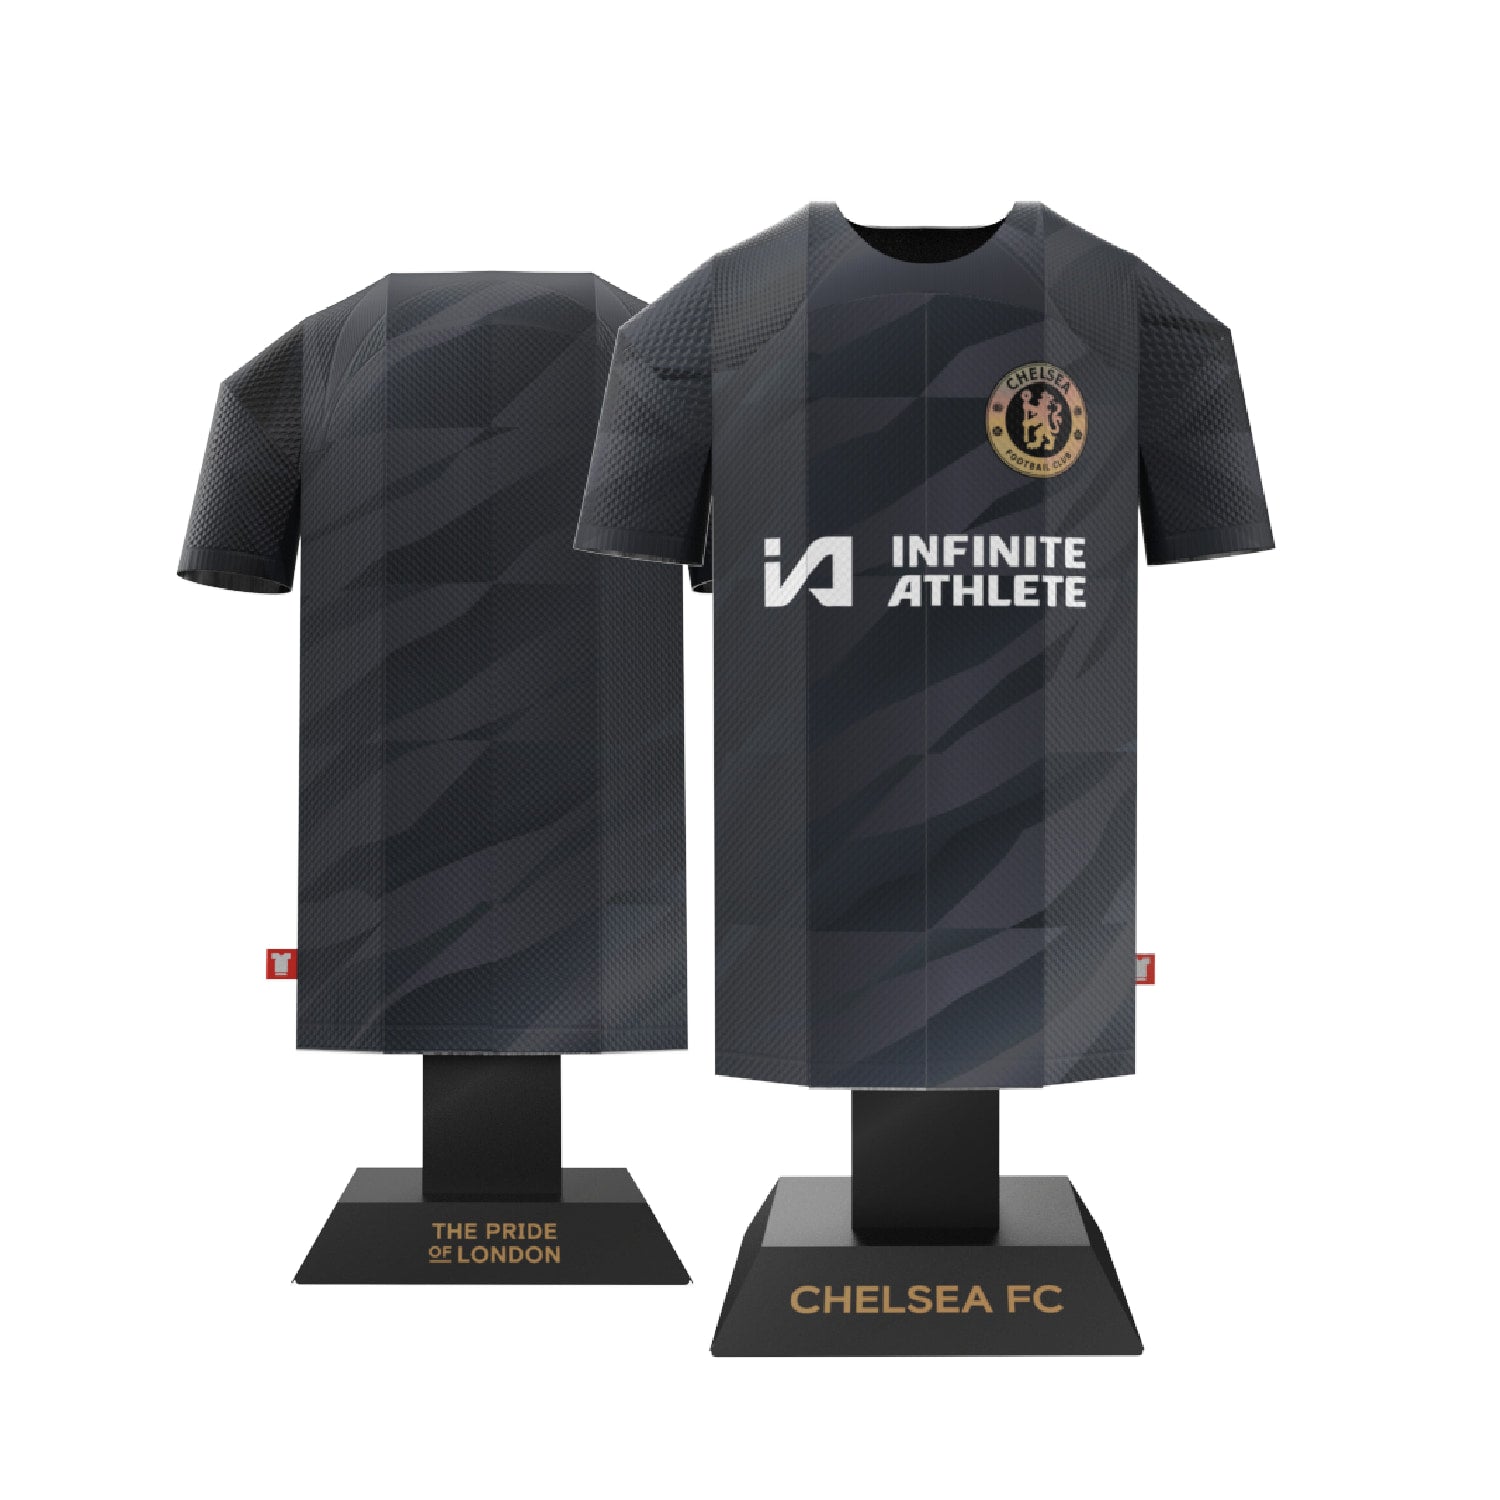 Chelsea goalkeeper kit front and back view